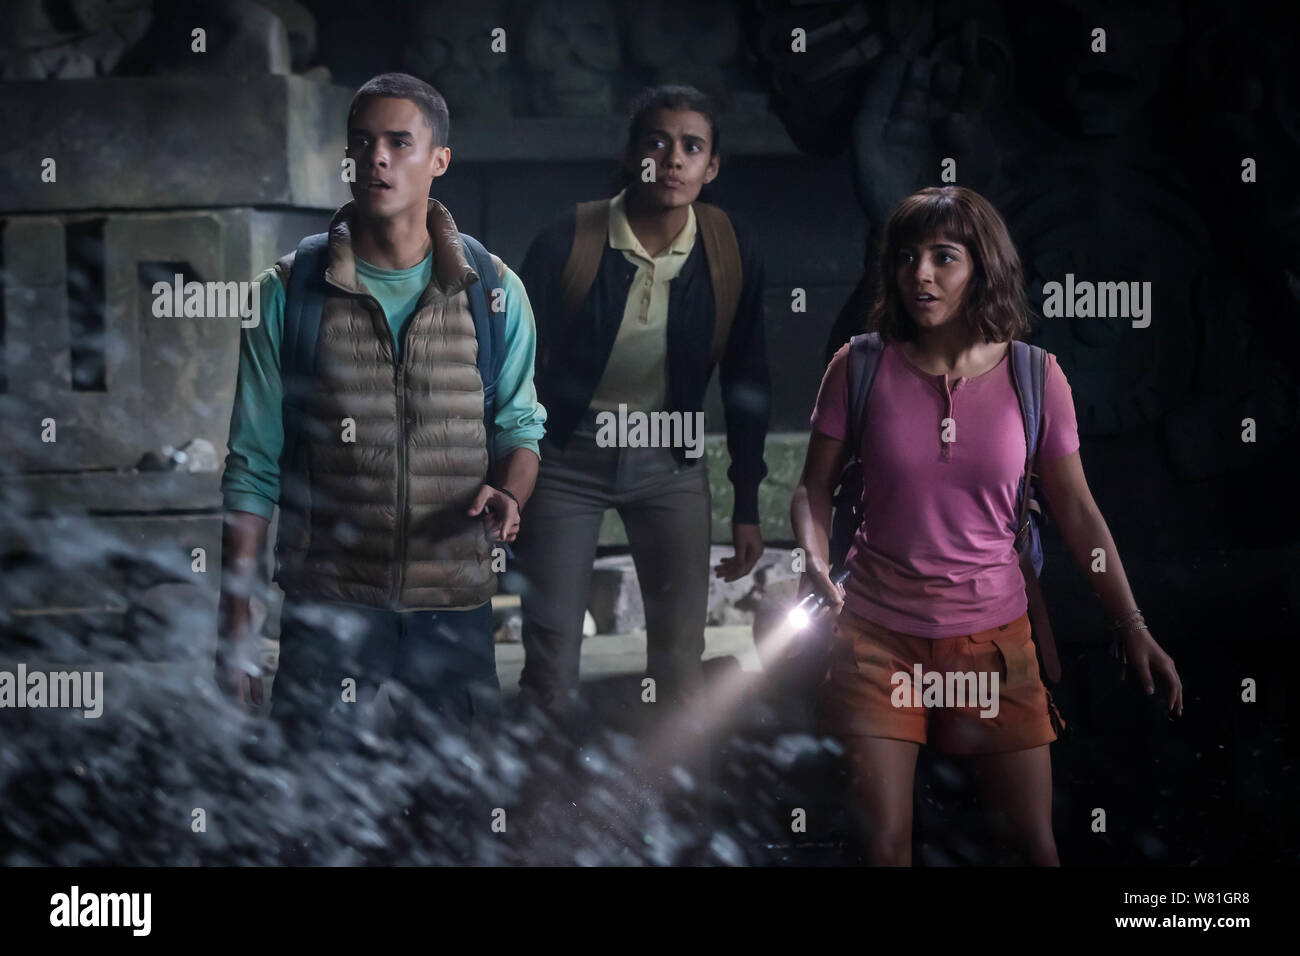 RELEASE DATE: August 9, 2019 TITLE: Dora and the Lost City of Gold STUDIO: Paramount Pictures DIRECTOR: James Bobin PLOT: Dora, a teenage explorer, leads her friends on an adventure to save her parents and solve the mystery behind a lost city of gold. STARRING: MICHAEL PENA as Dora's father, ISABELA MONER as Dora, EVA LONGORIA as Elena. (Credit Image: © Paramount Pictures/Entertainment Pictures) Stock Photo